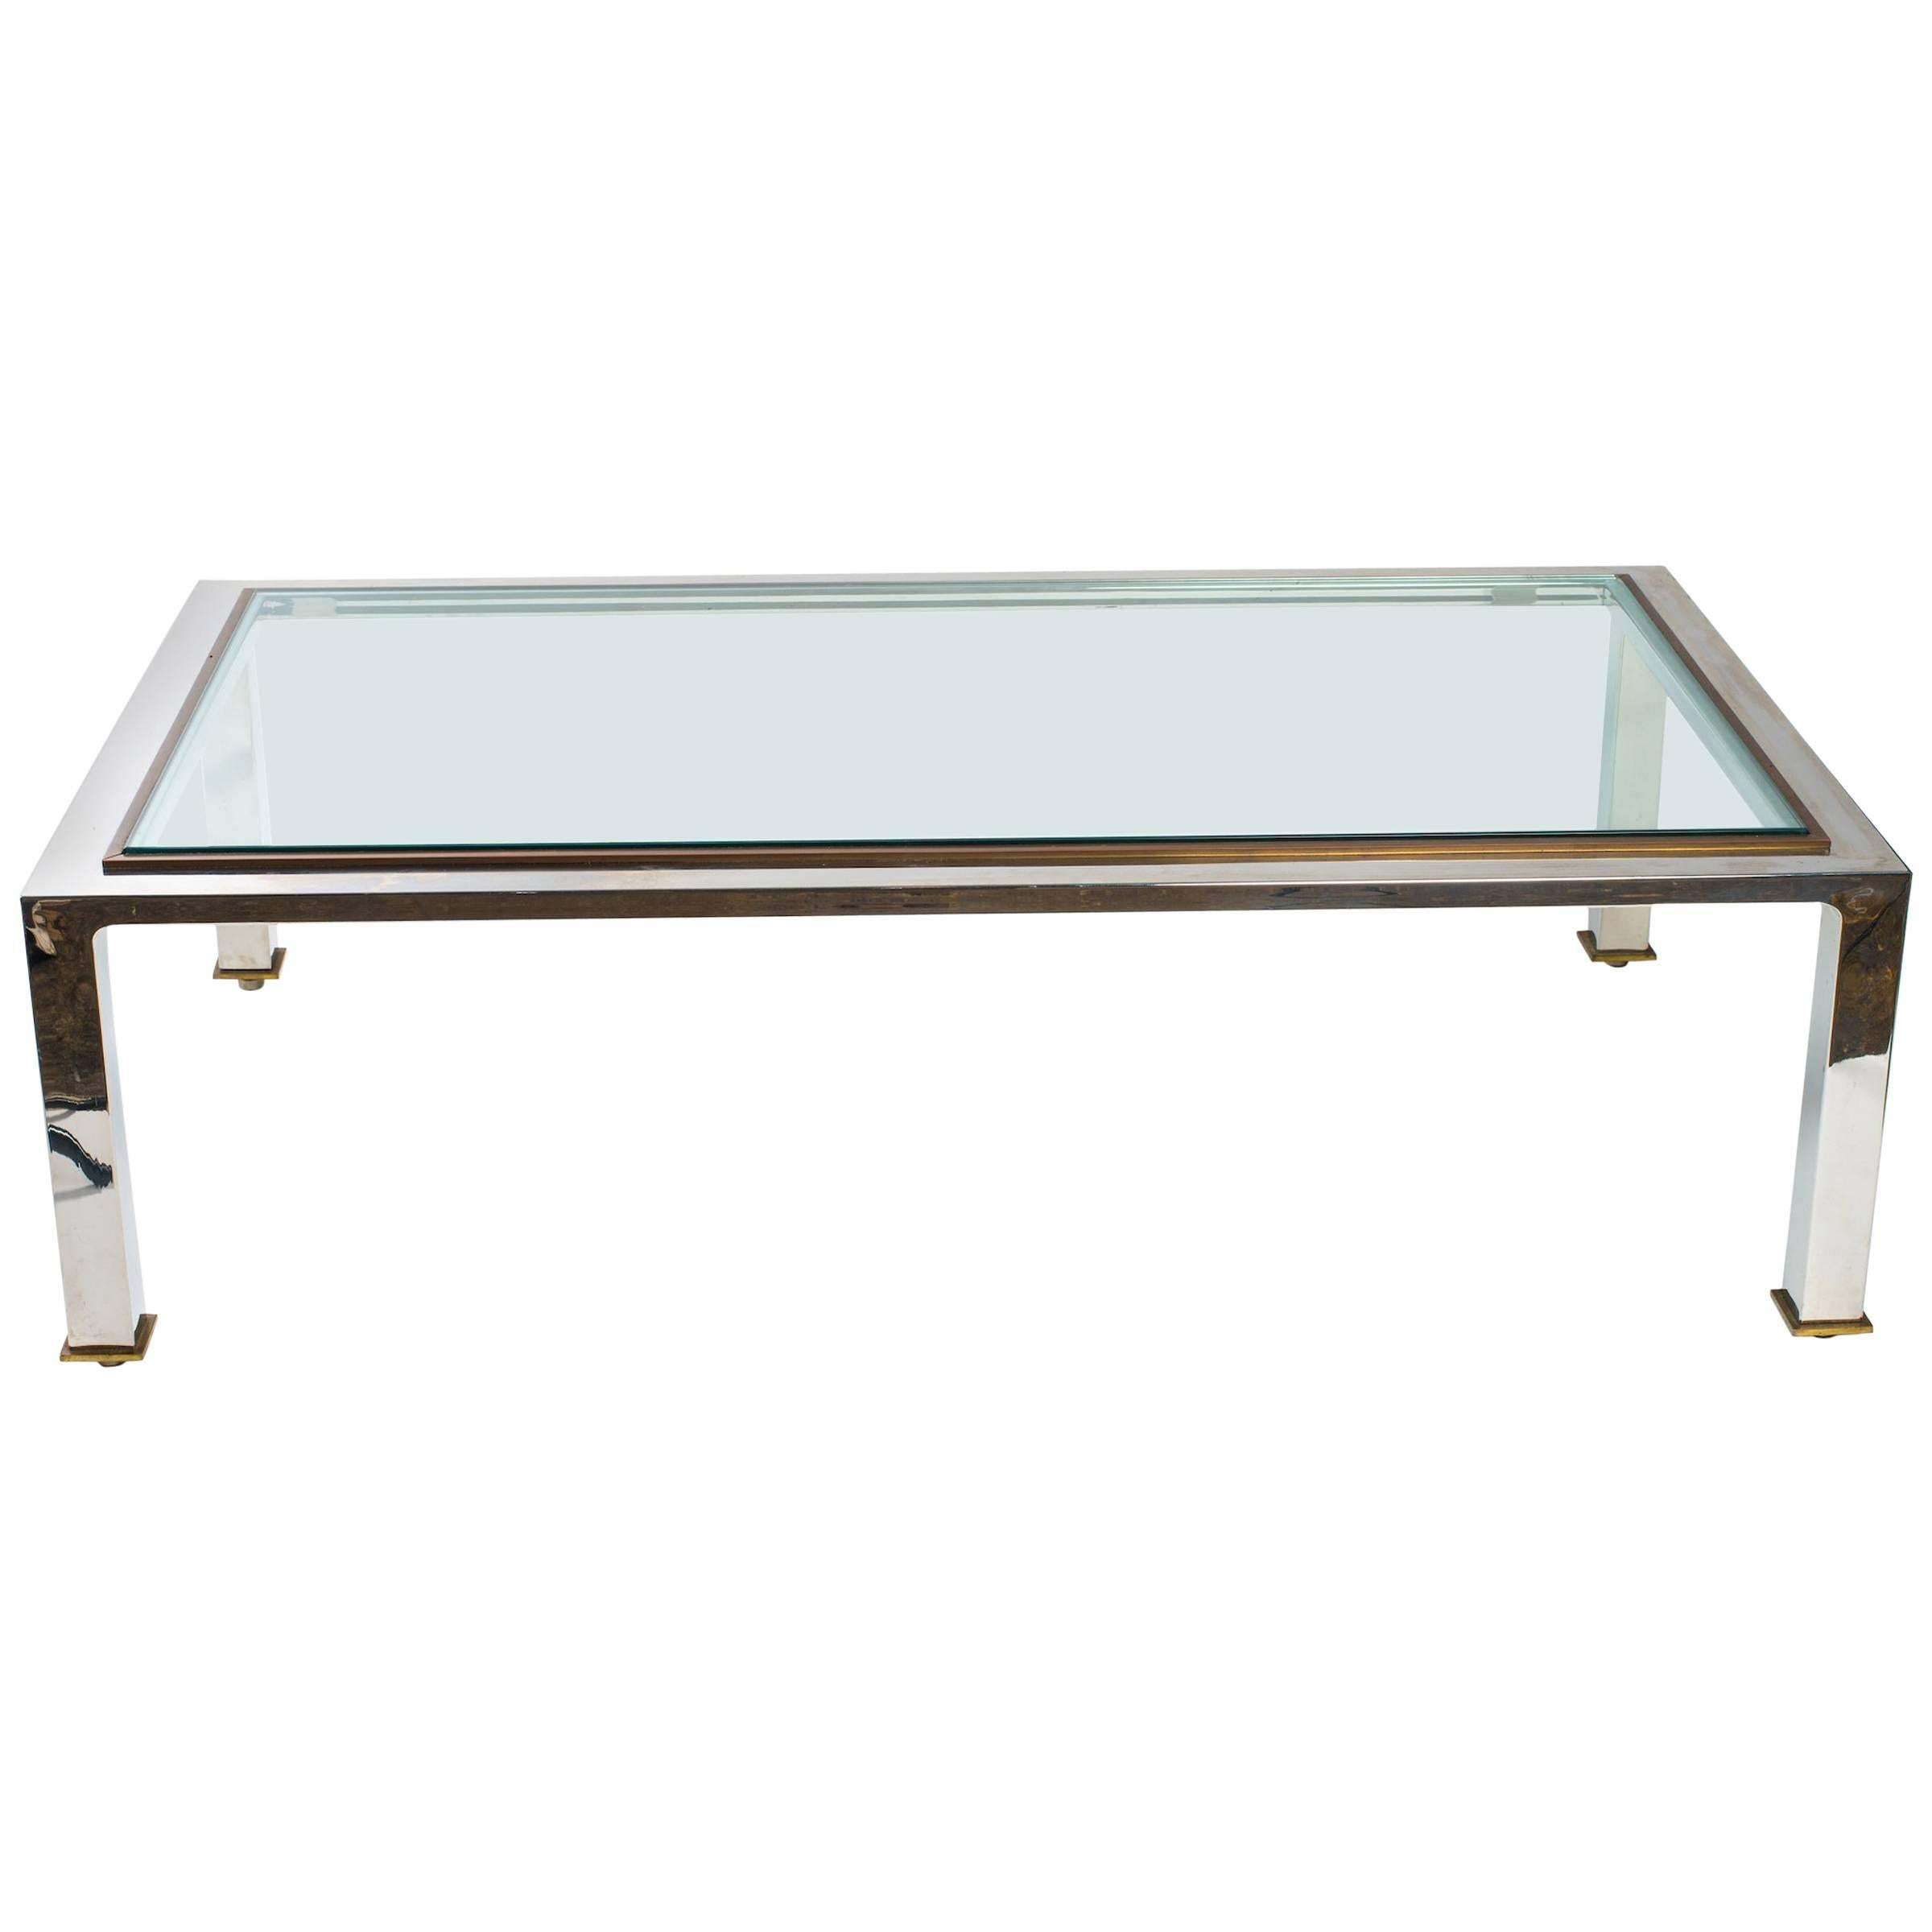 1970s Chrome and Brass Coffee Table